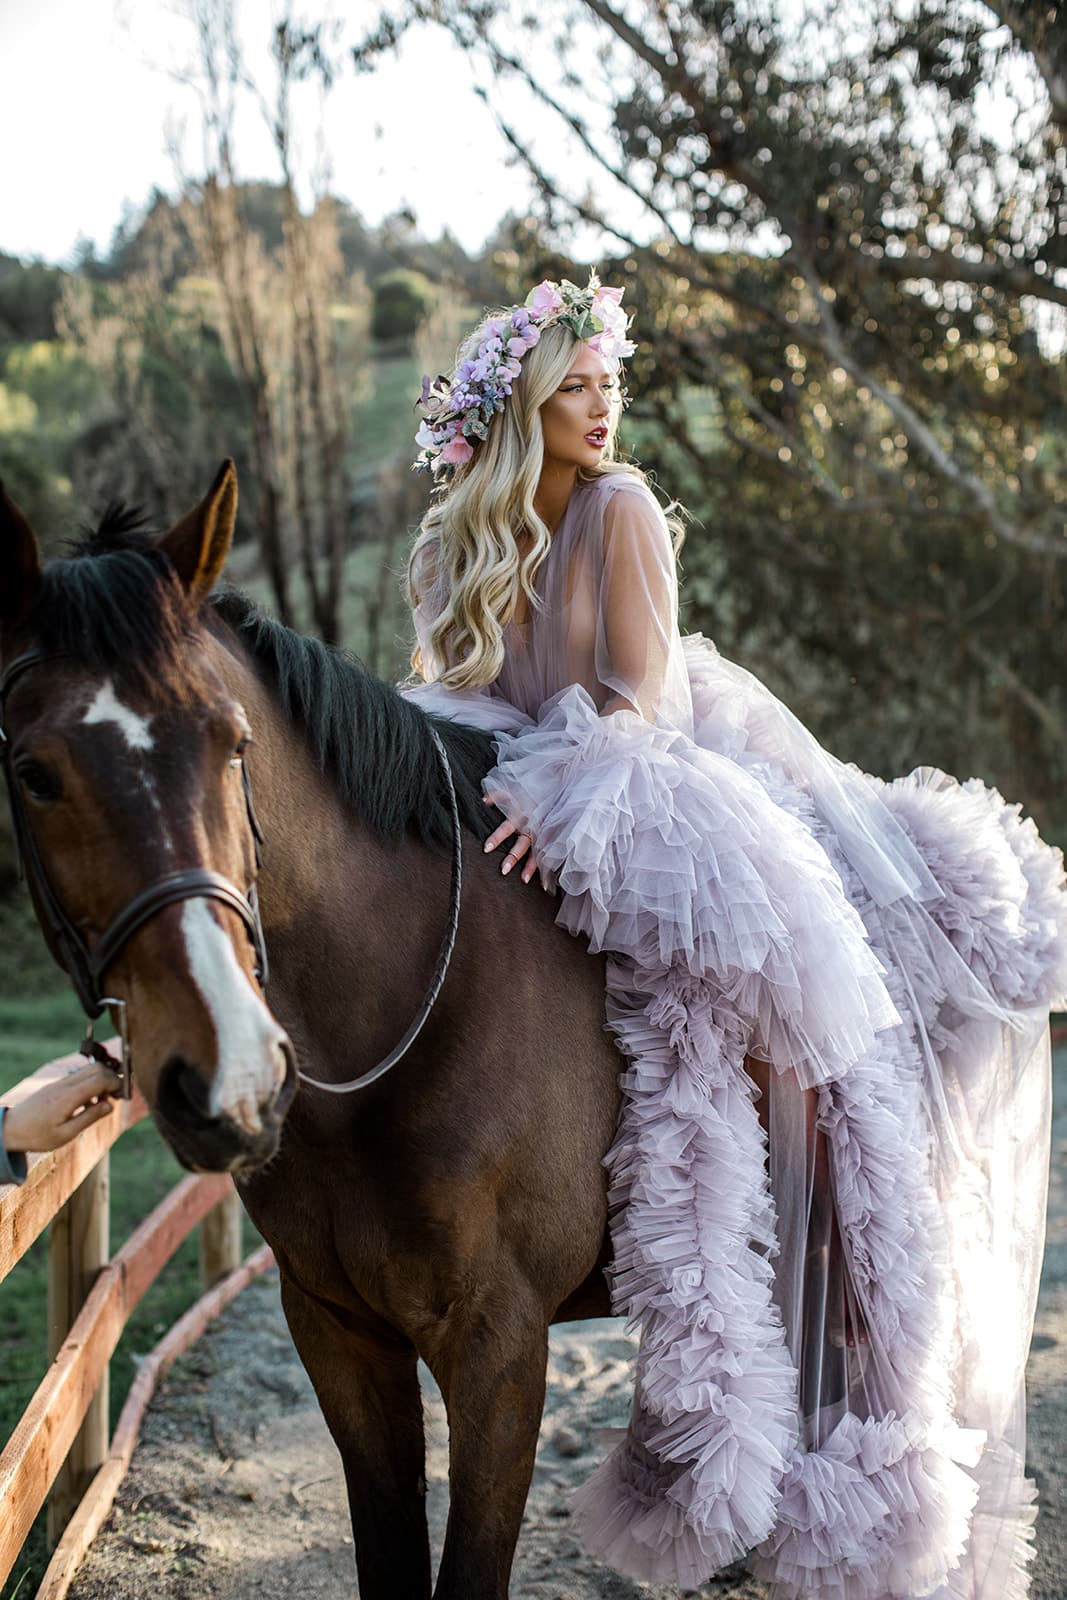 Model atop horse with flower crown and luxury robe